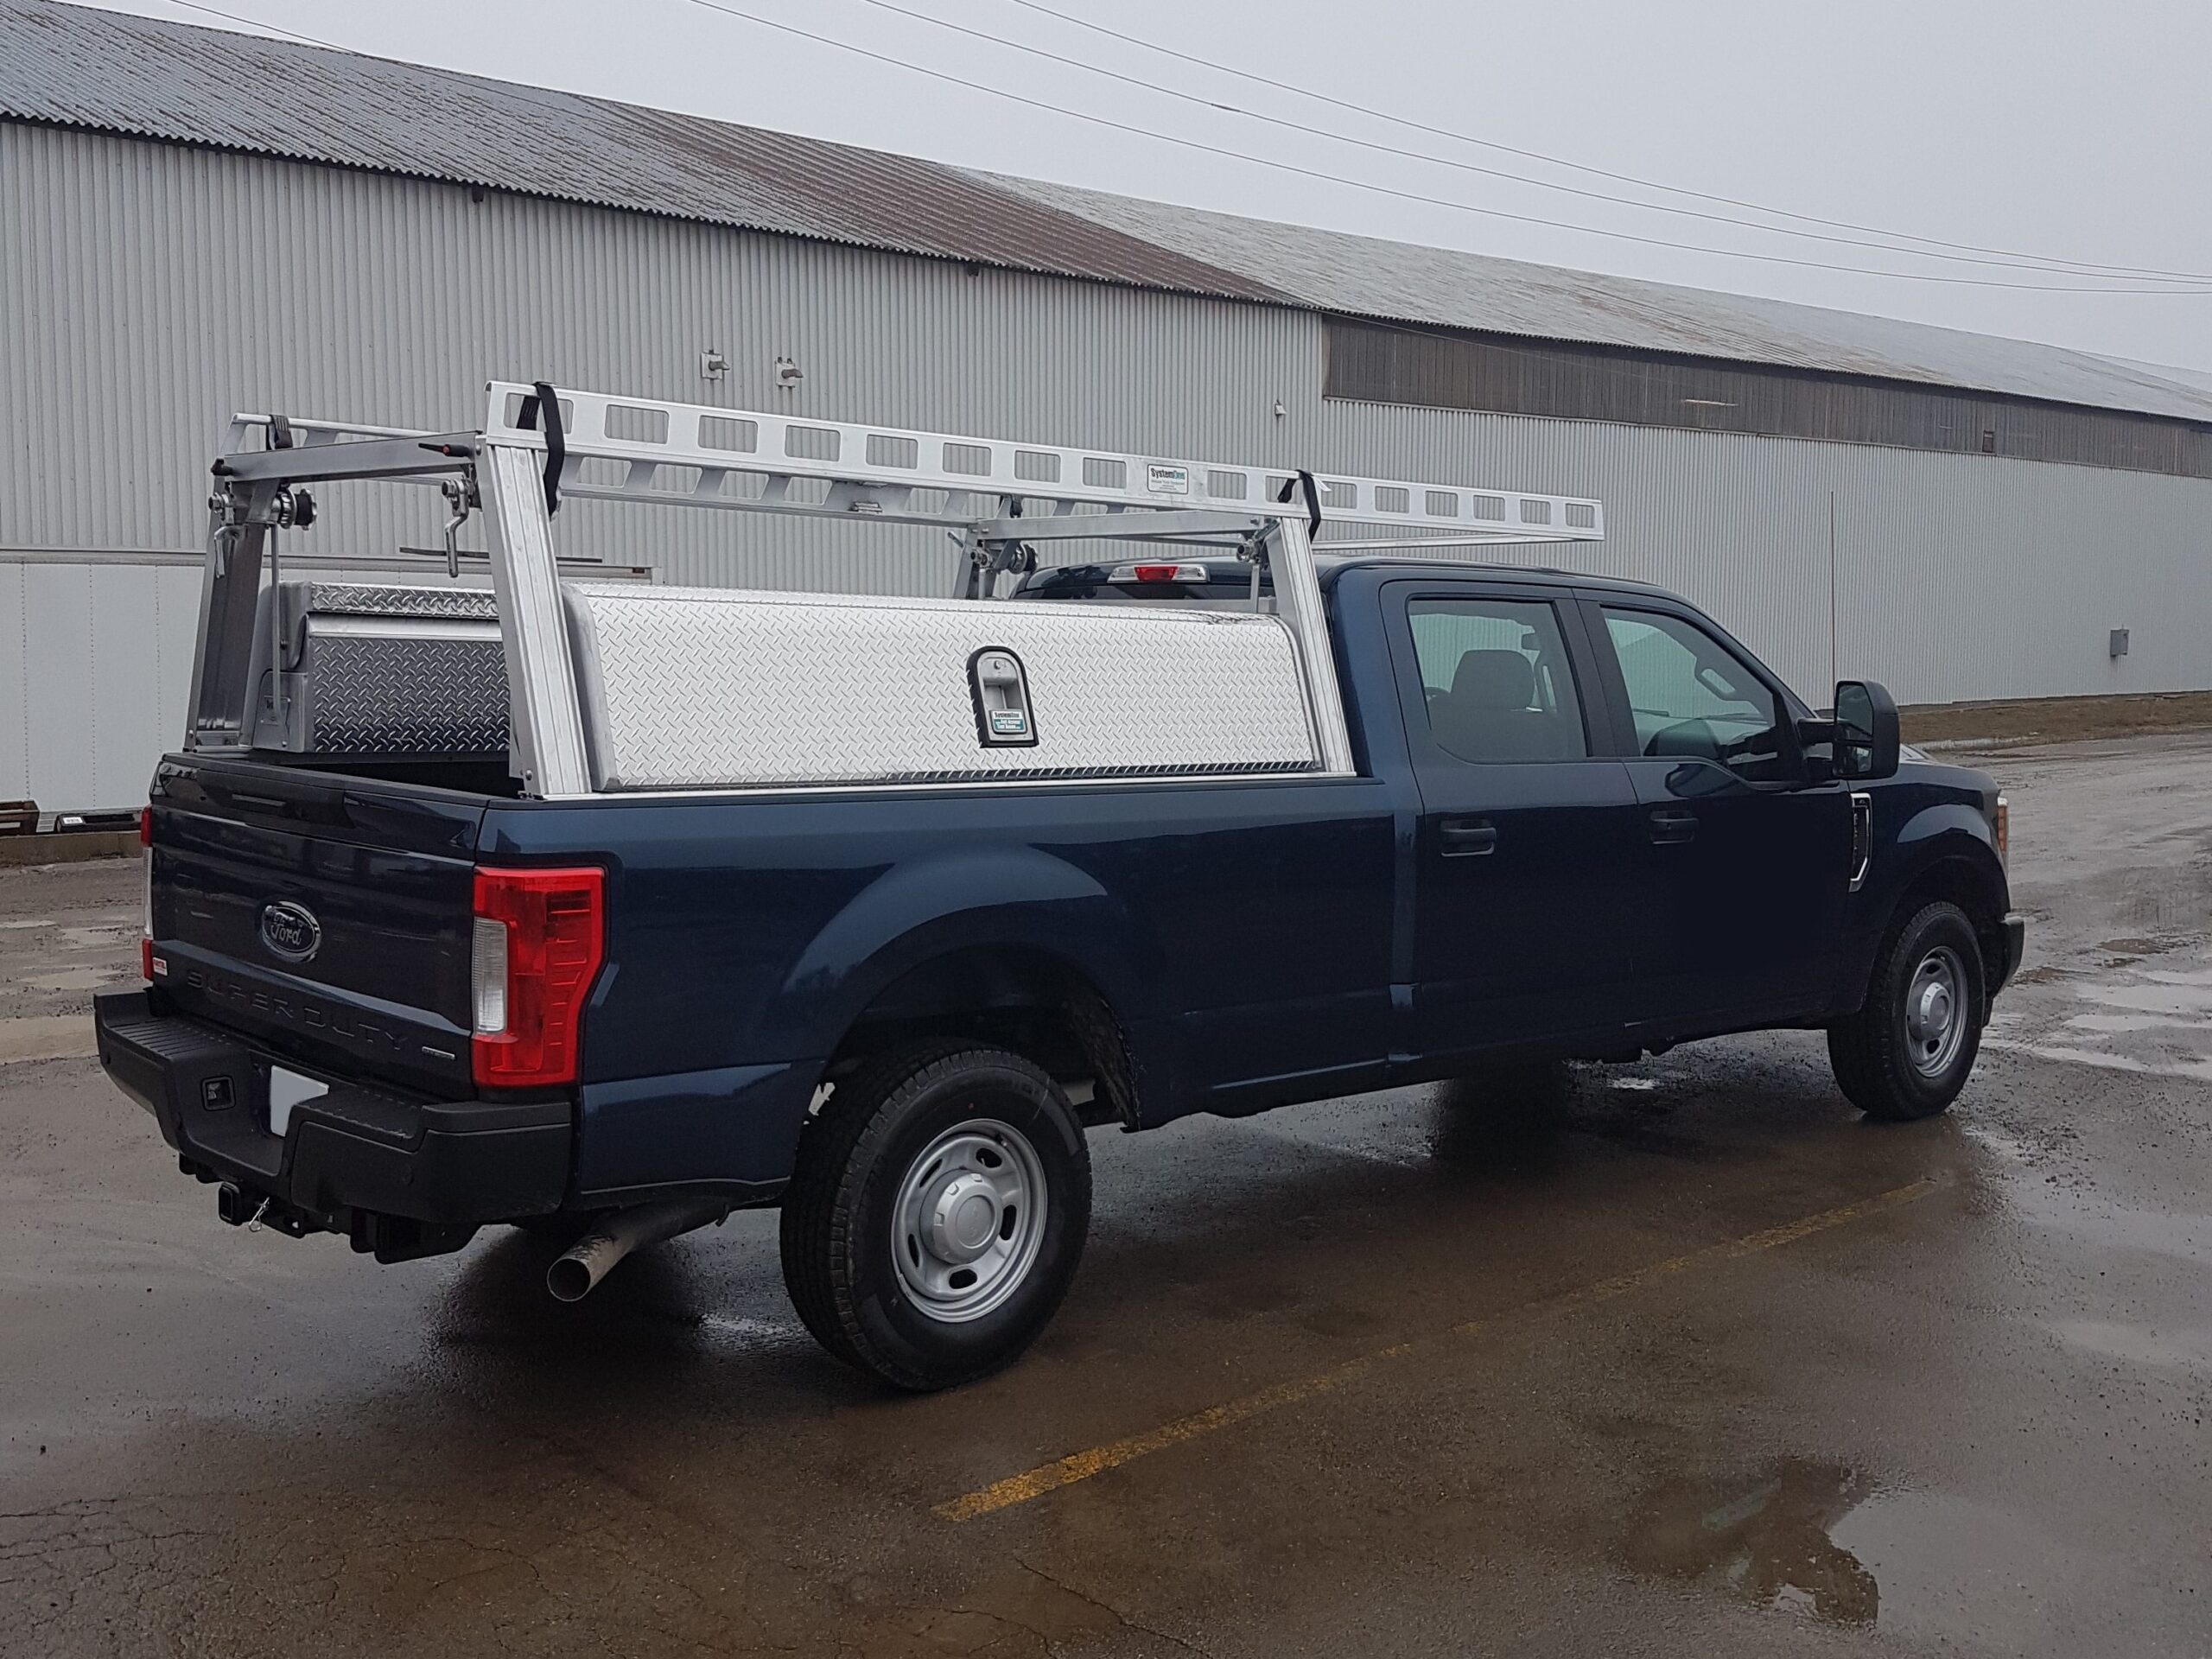 Ford F-250 Ladder Rack with Side Toolboxes & Cab Guard